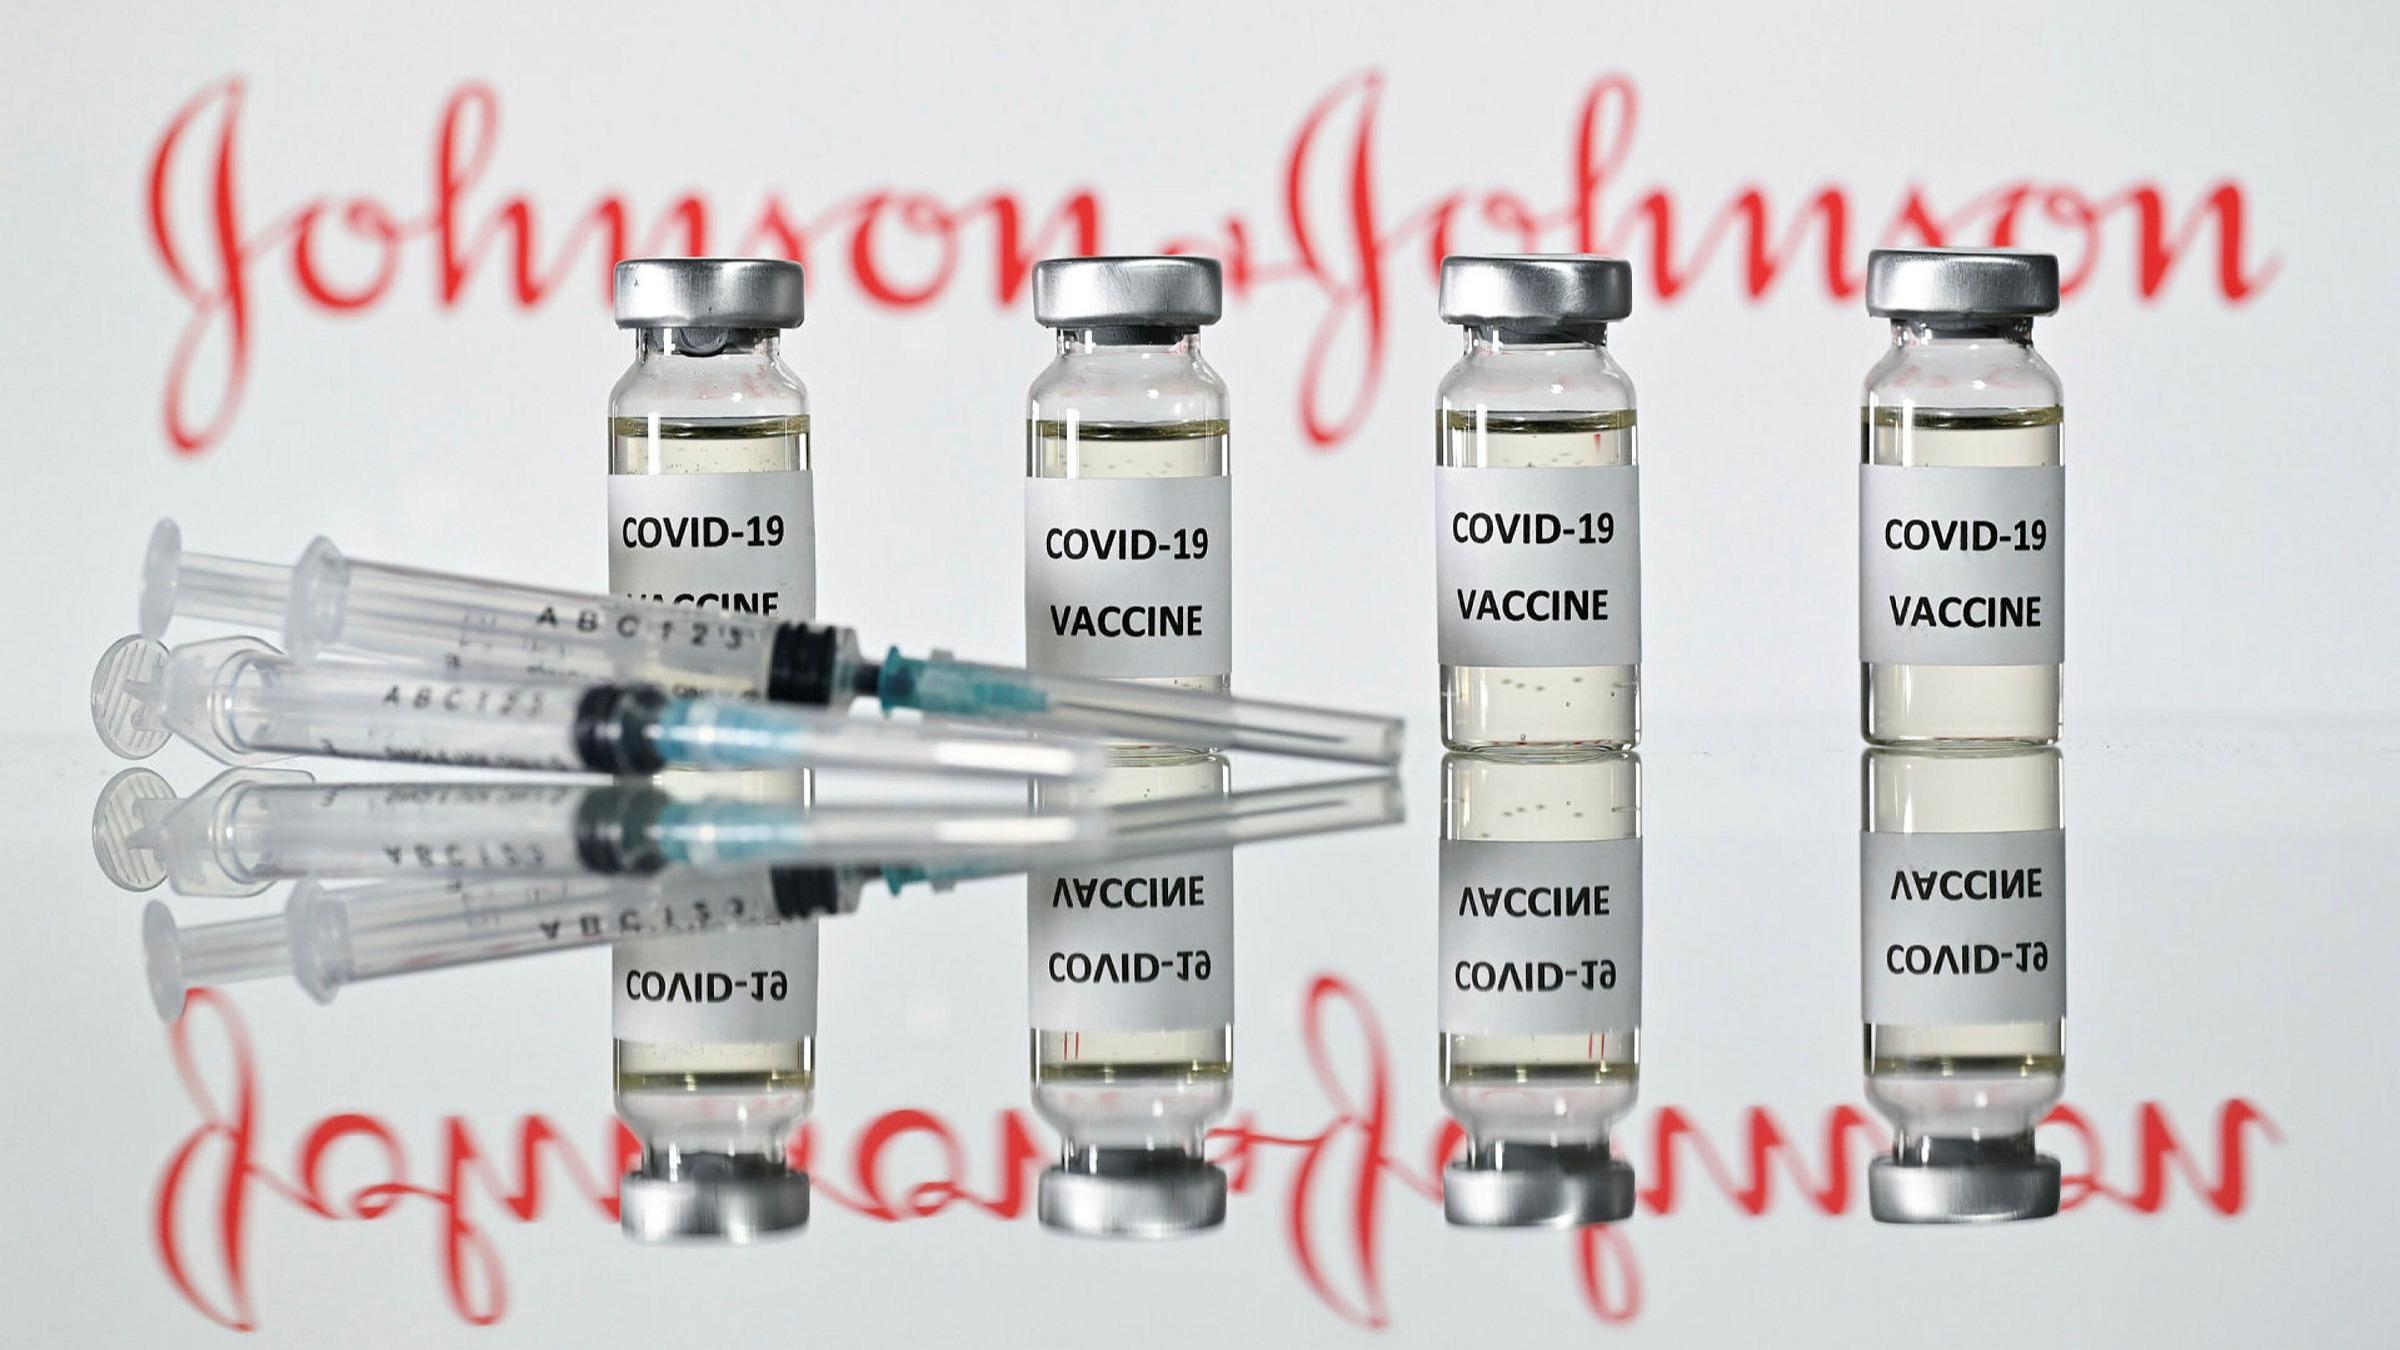 50,400 doses of Johnson & Johnson vaccine to arrive in B&H by mid-November